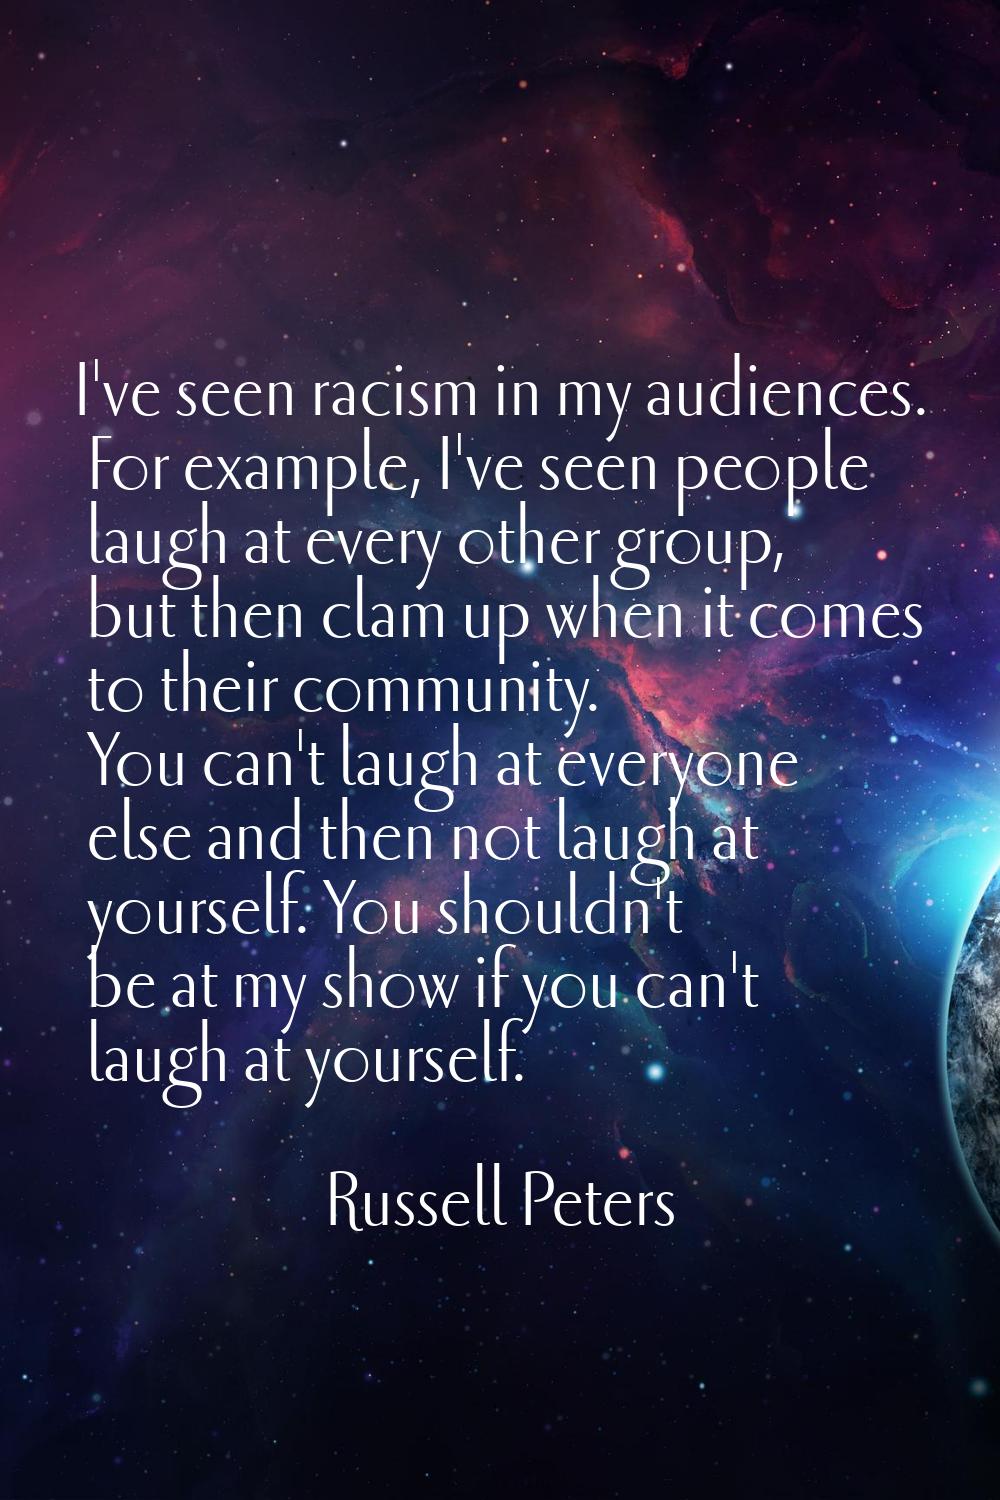 I've seen racism in my audiences. For example, I've seen people laugh at every other group, but the